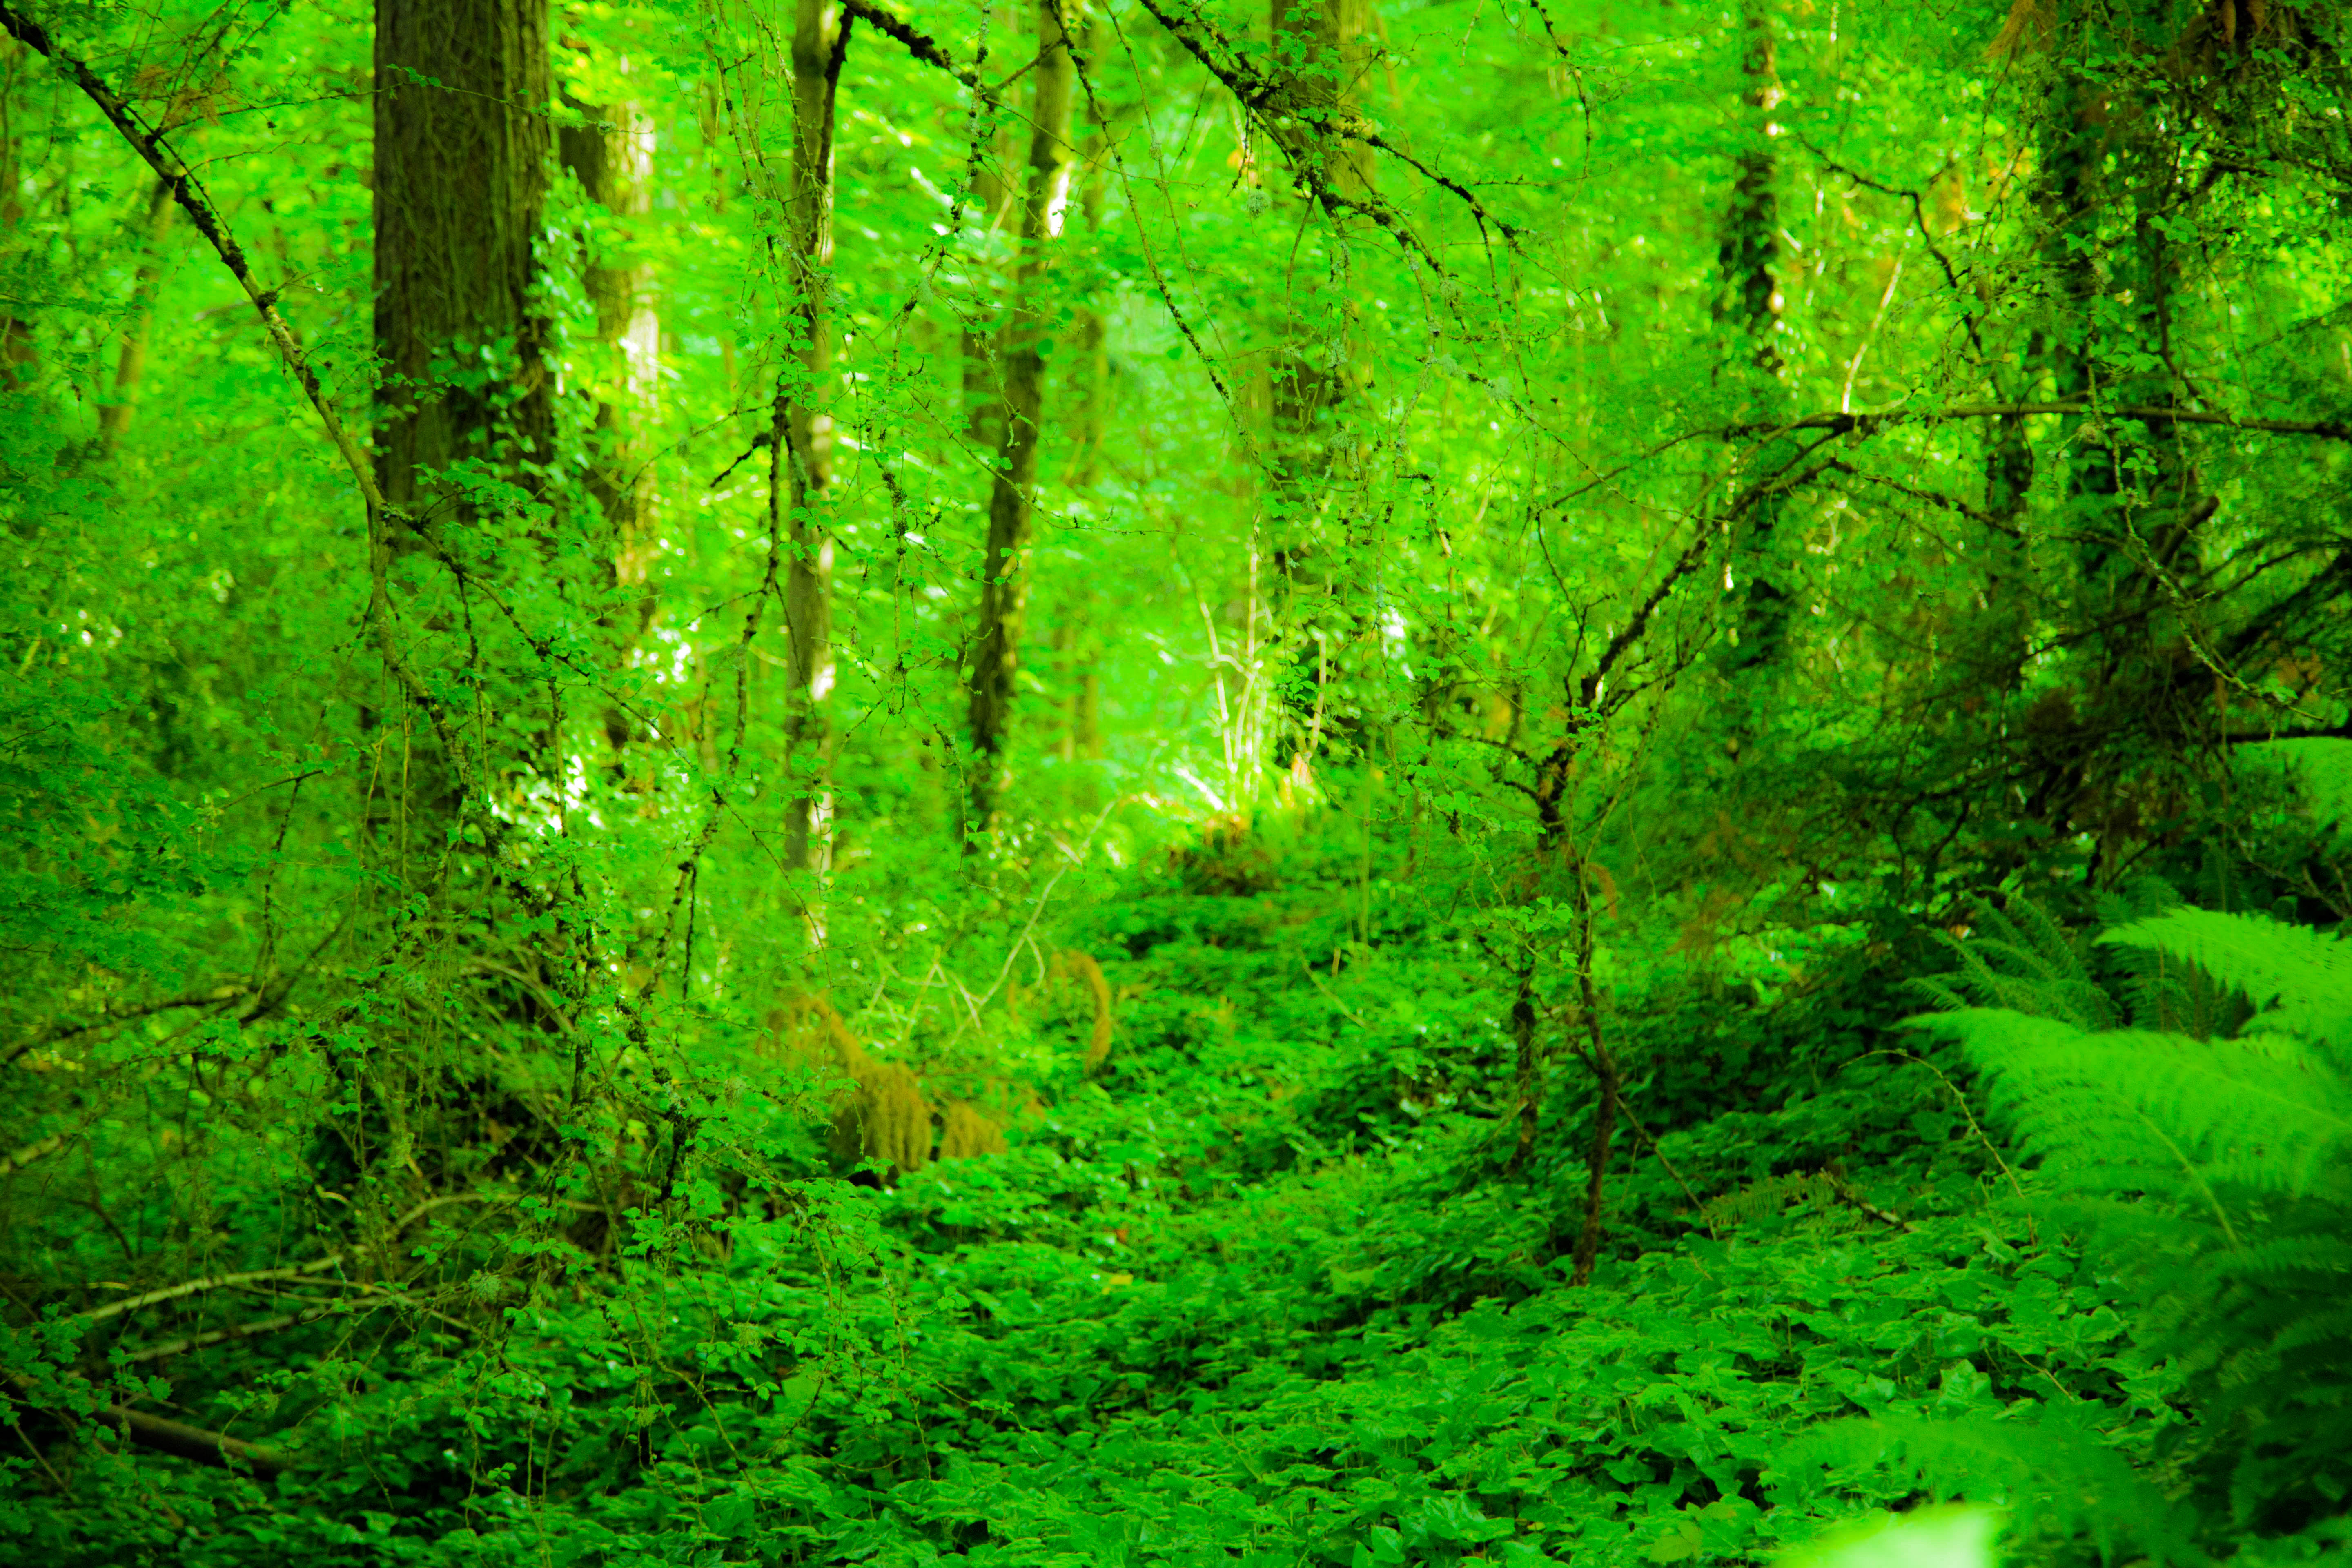 A dense forest with green foliage